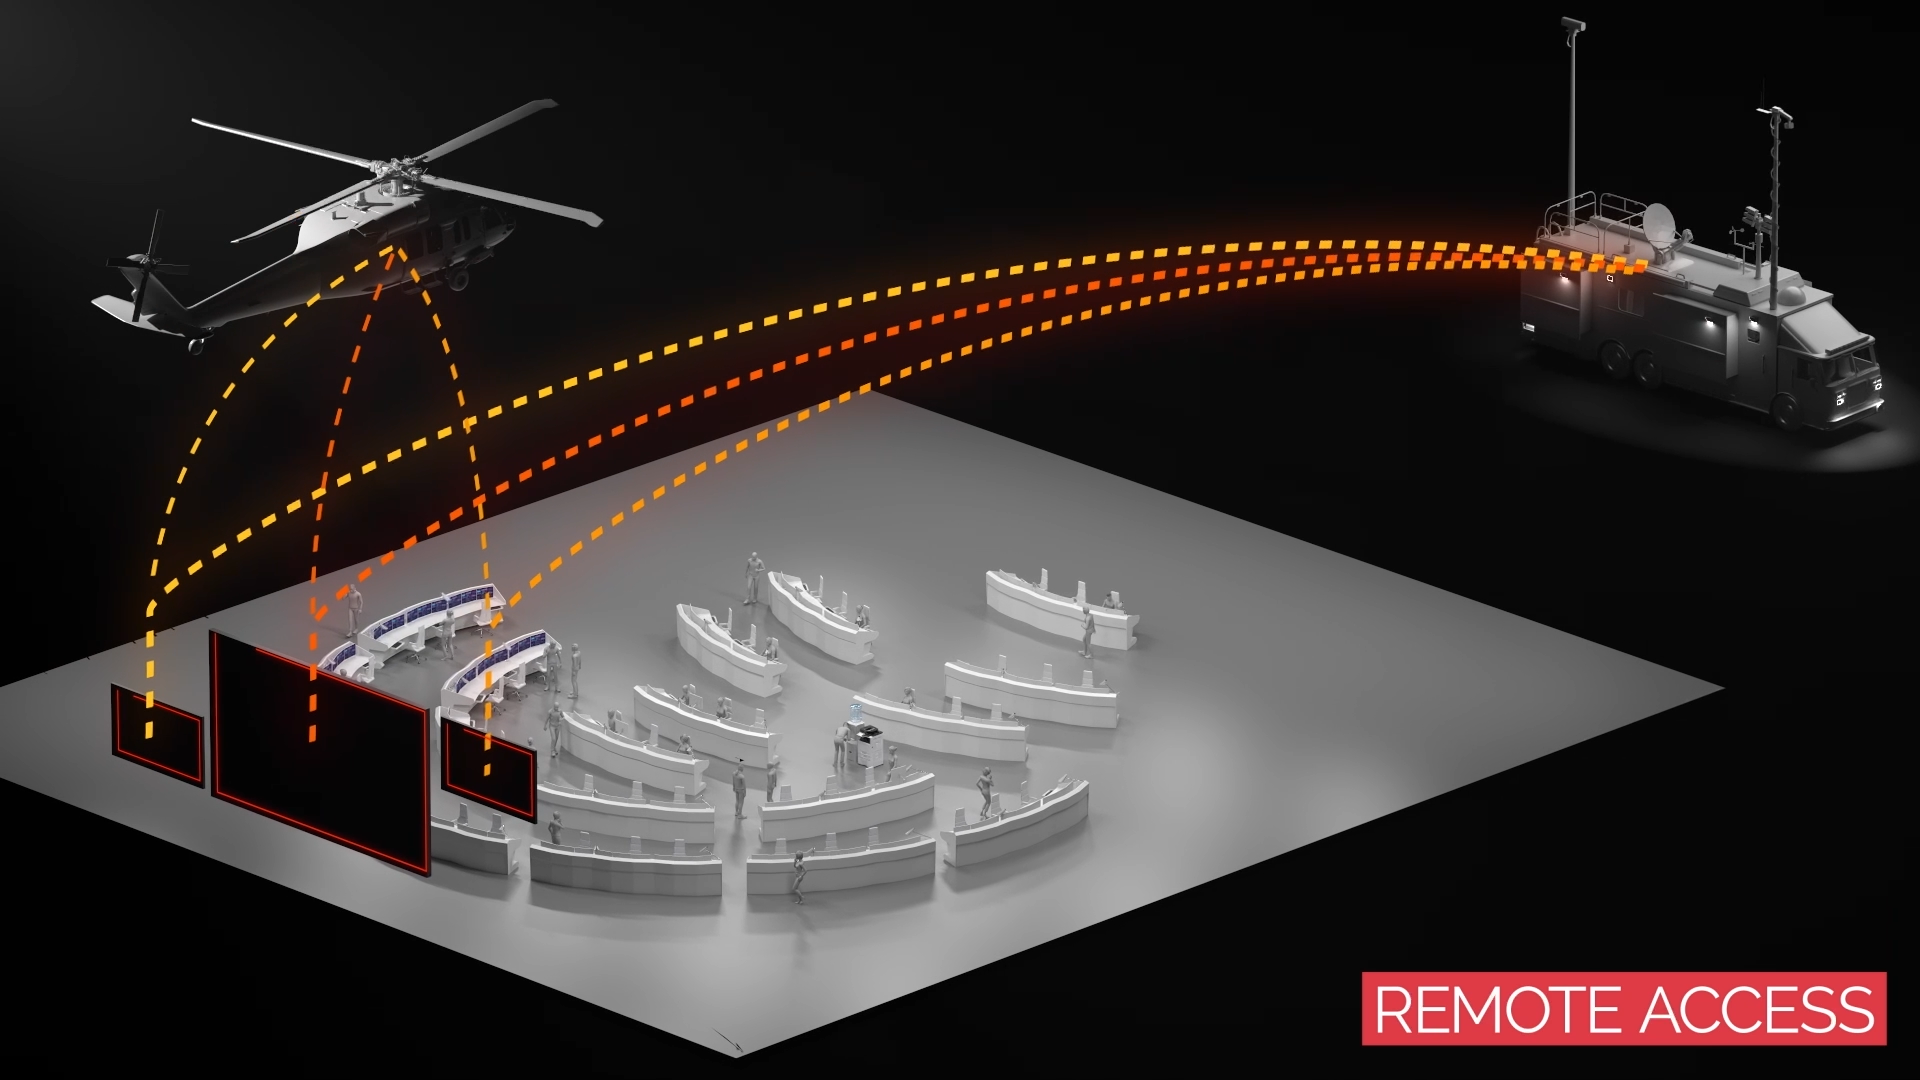 Overview 3D animated still showing command room and remote access via VR